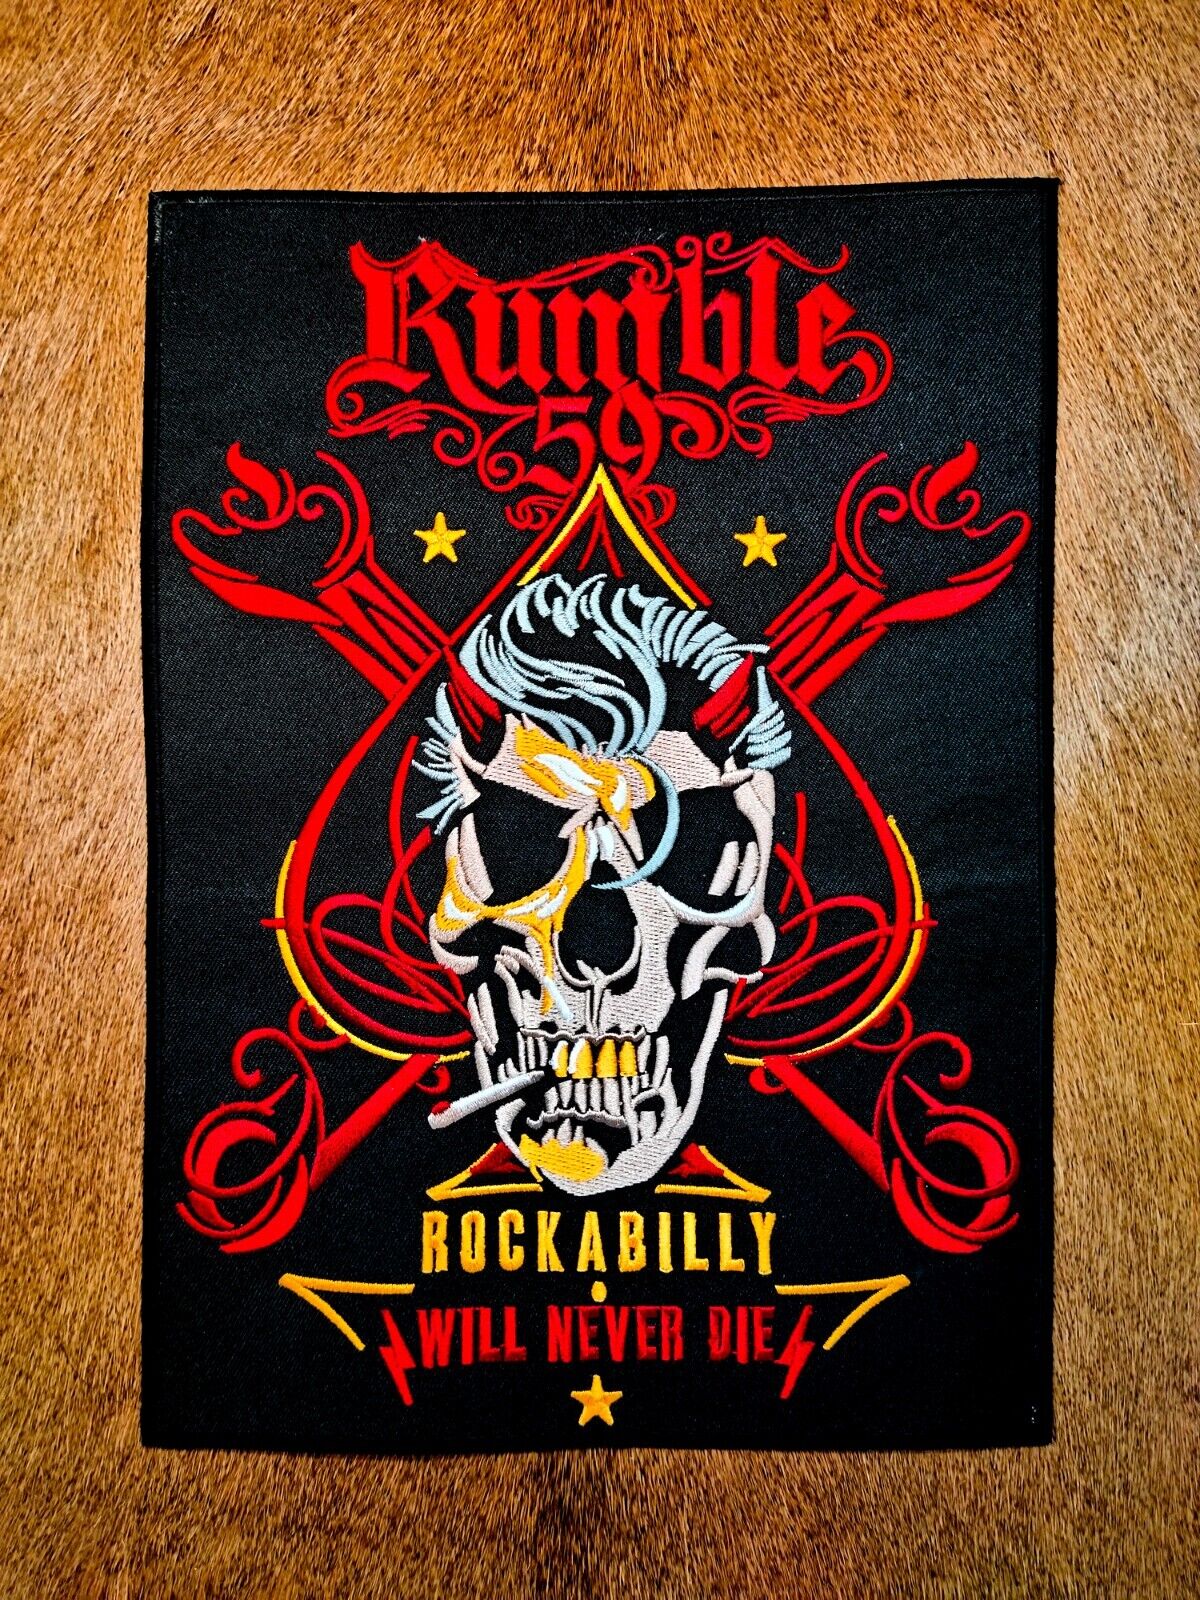 Large Rumble 59 Rockabilly Will Never Die Skull Rock And Roll Old School Patch